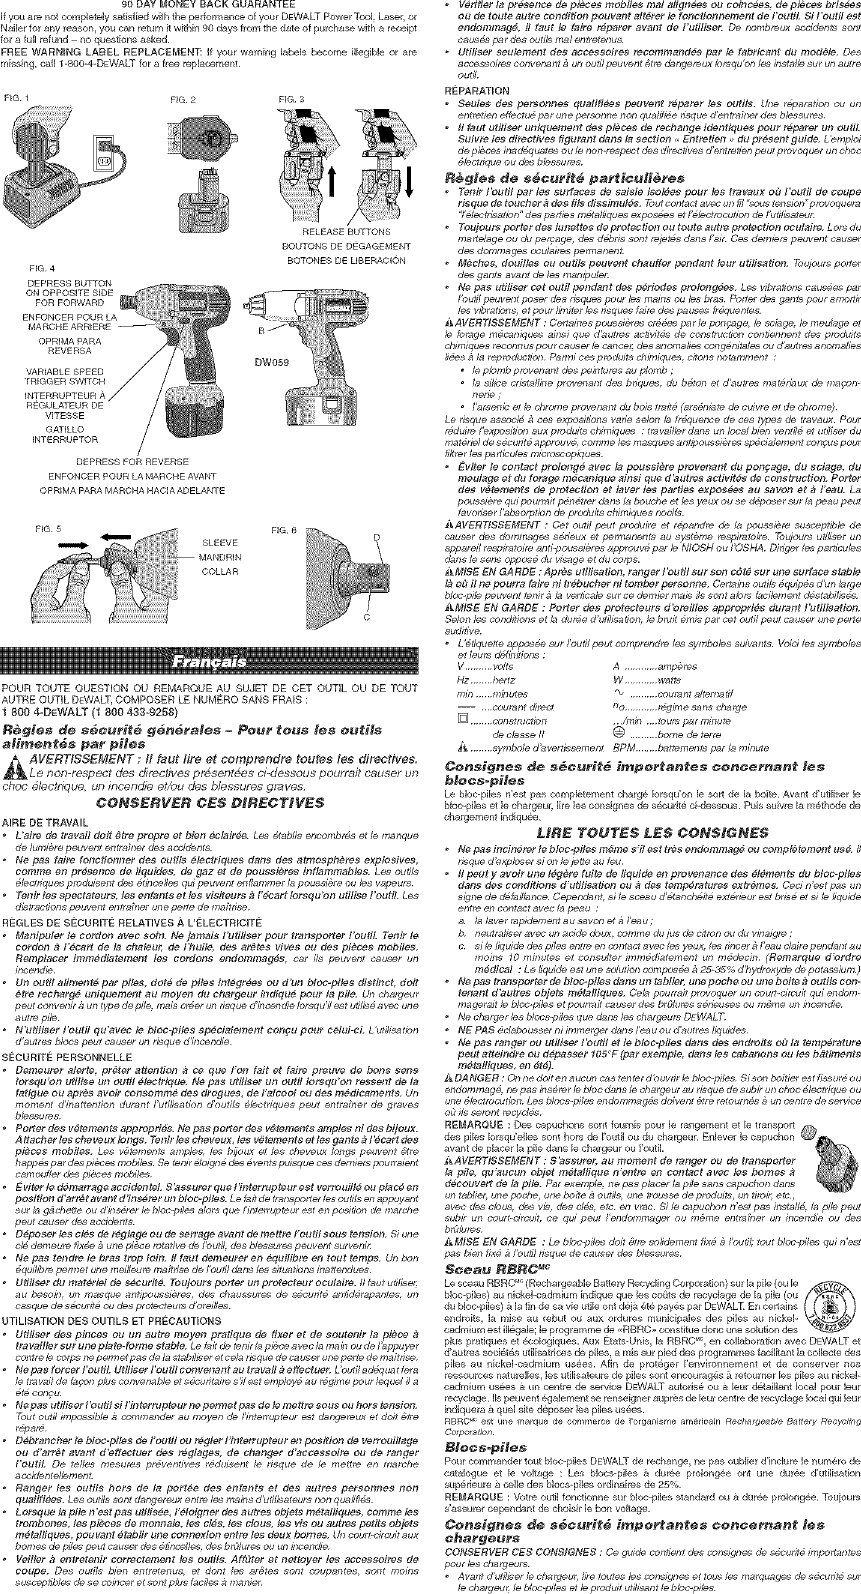 Page 3 of 7 - DEWALT  Wrenches And Accessories Manual L0522100